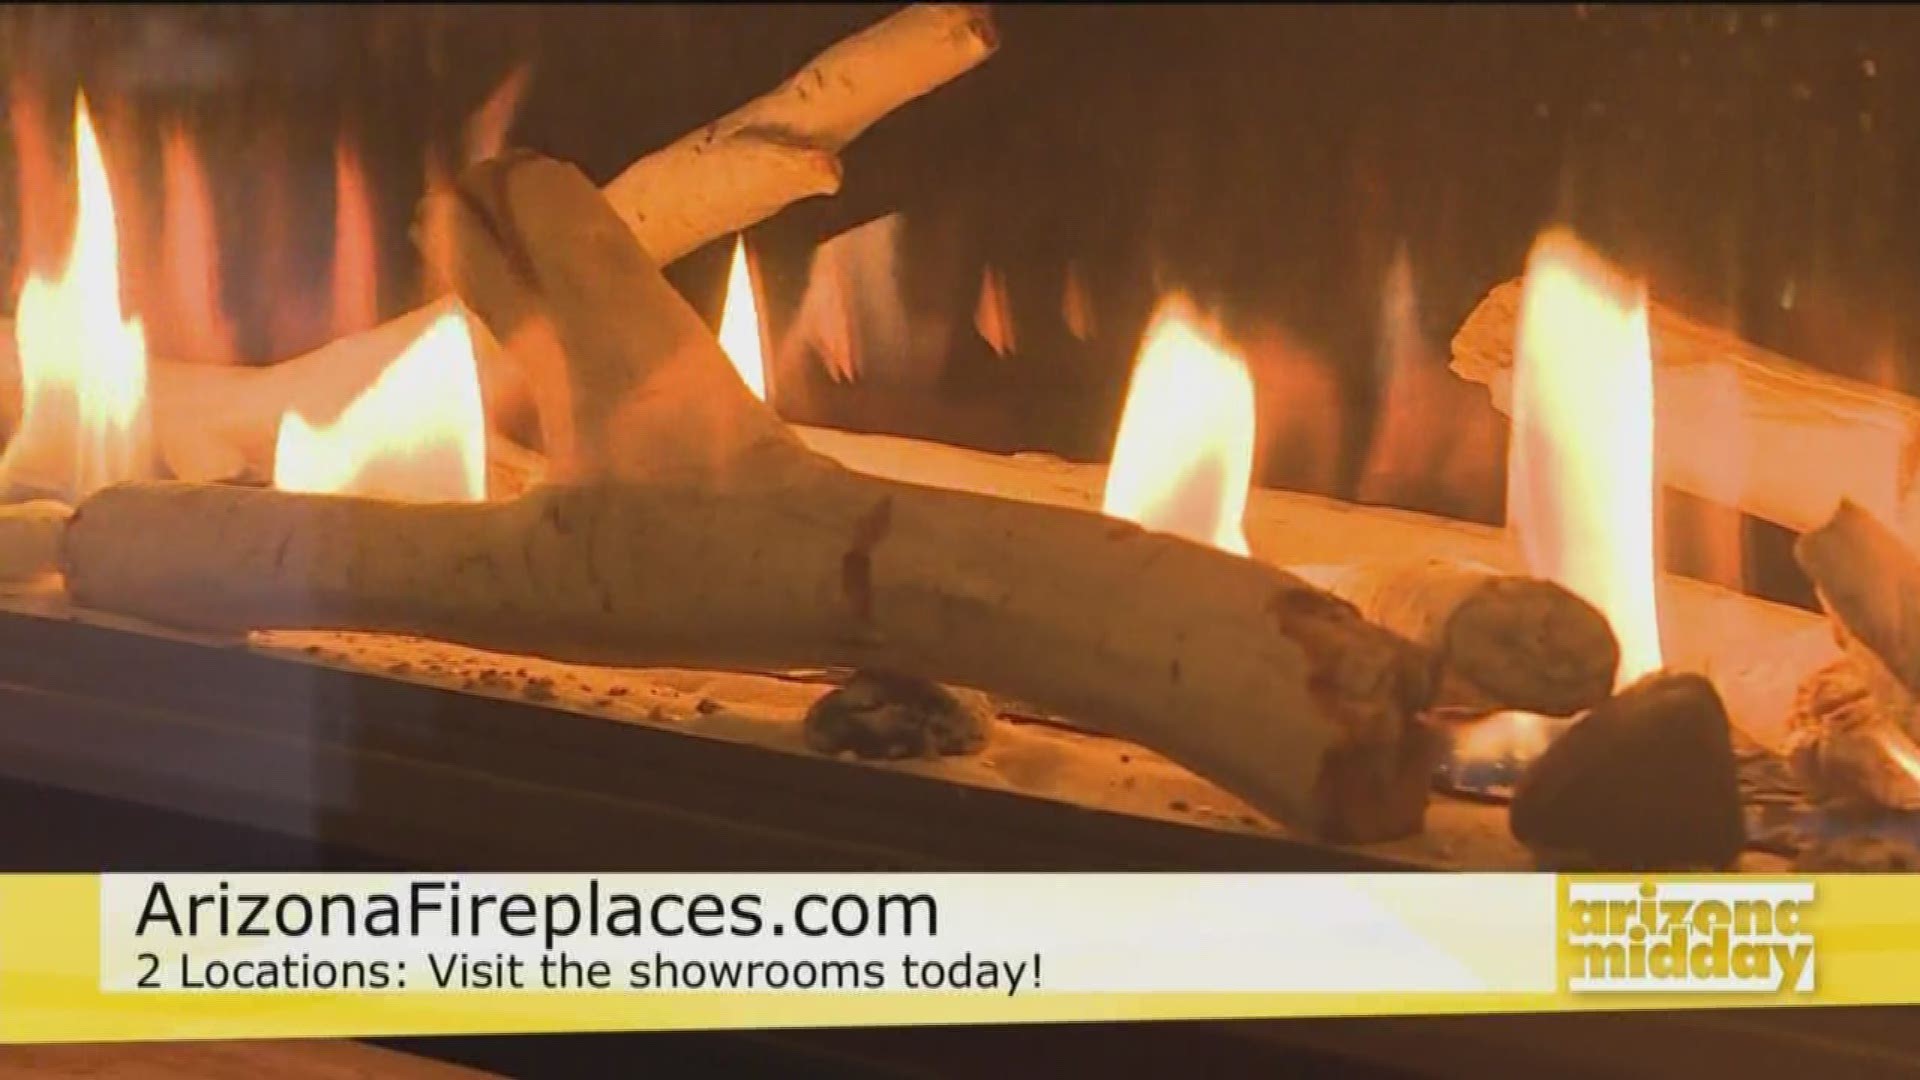 President of Arizona Fireplaces Keith Richardson gives us the scoop on the different types of fireplaces people can buy and how they can be used all year long!